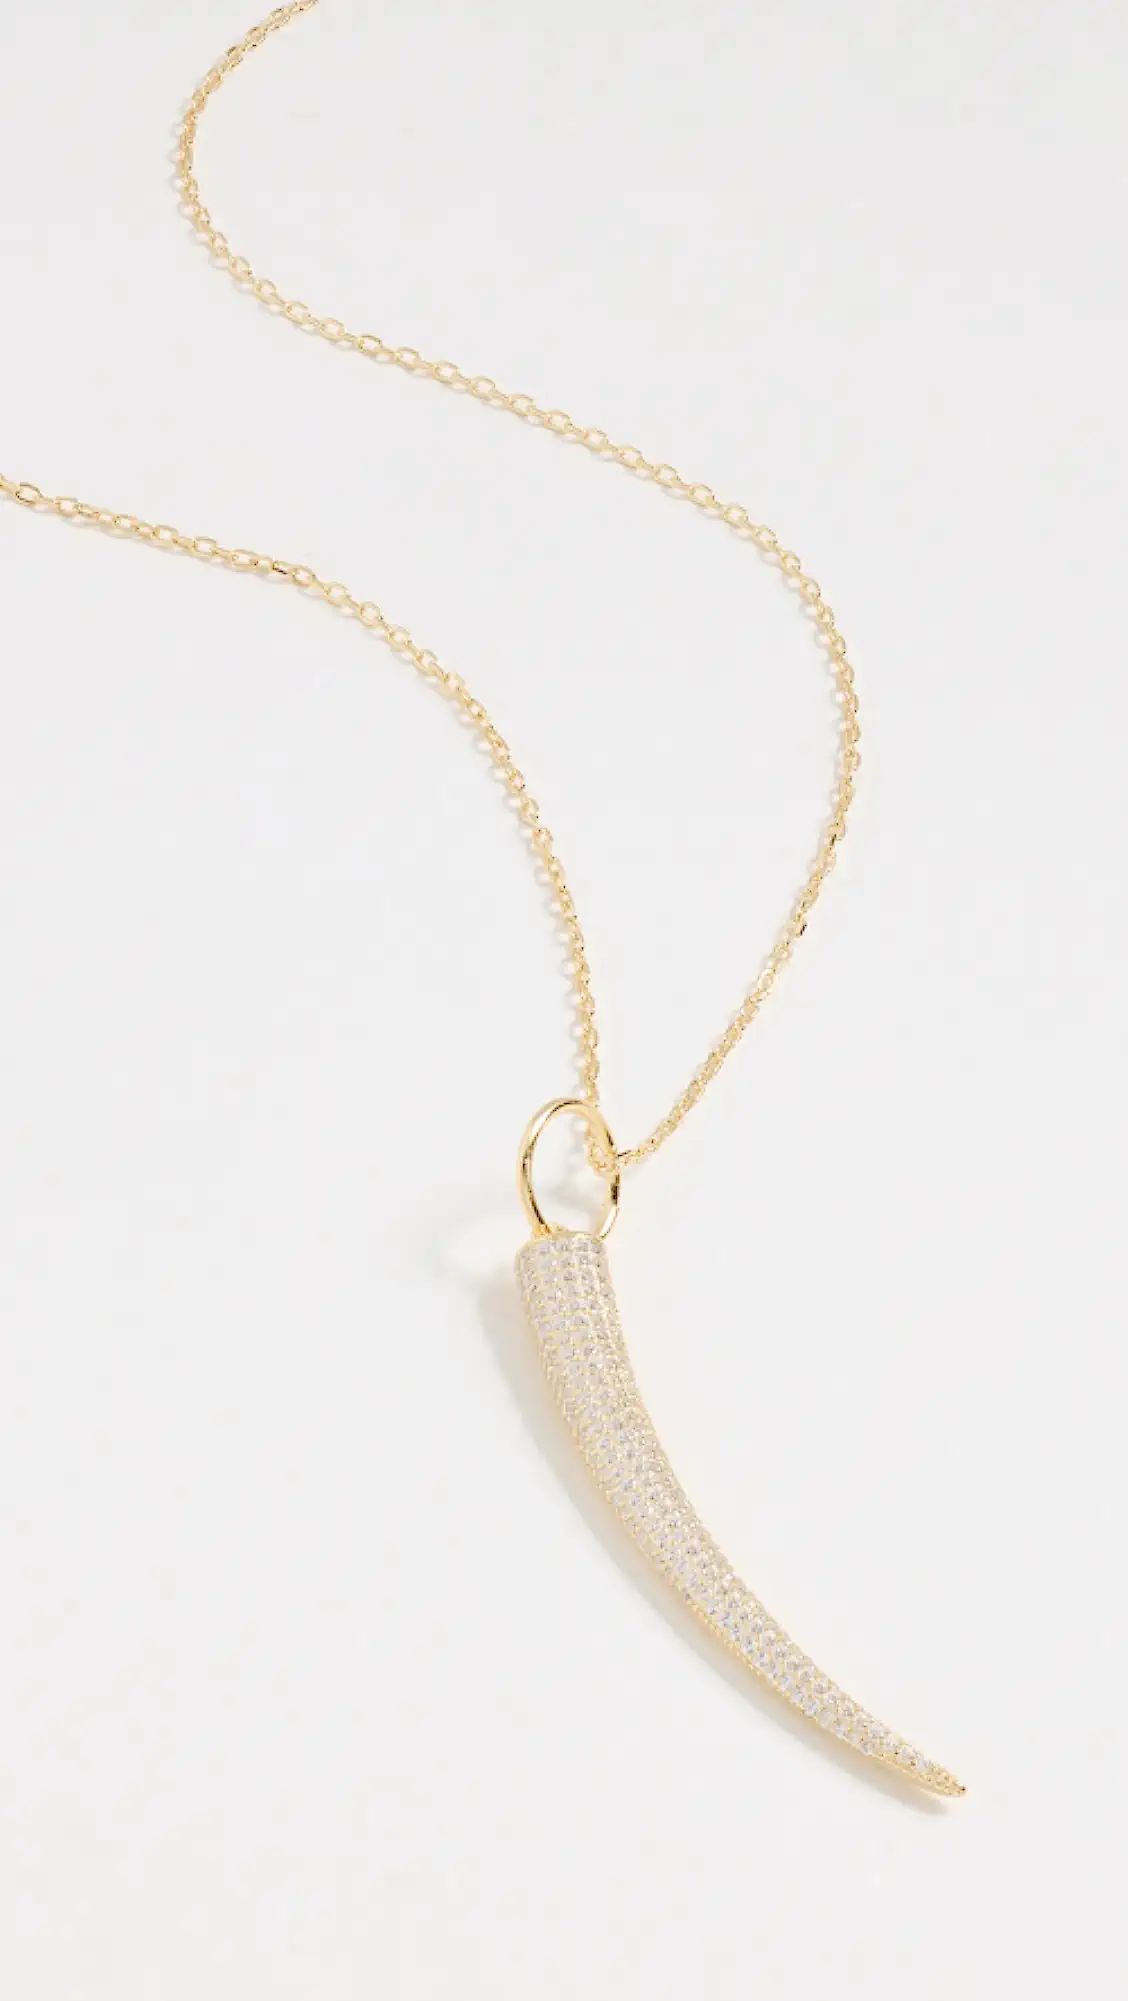 14k Pave Shark Tooth Necklace Charm | Shopbop